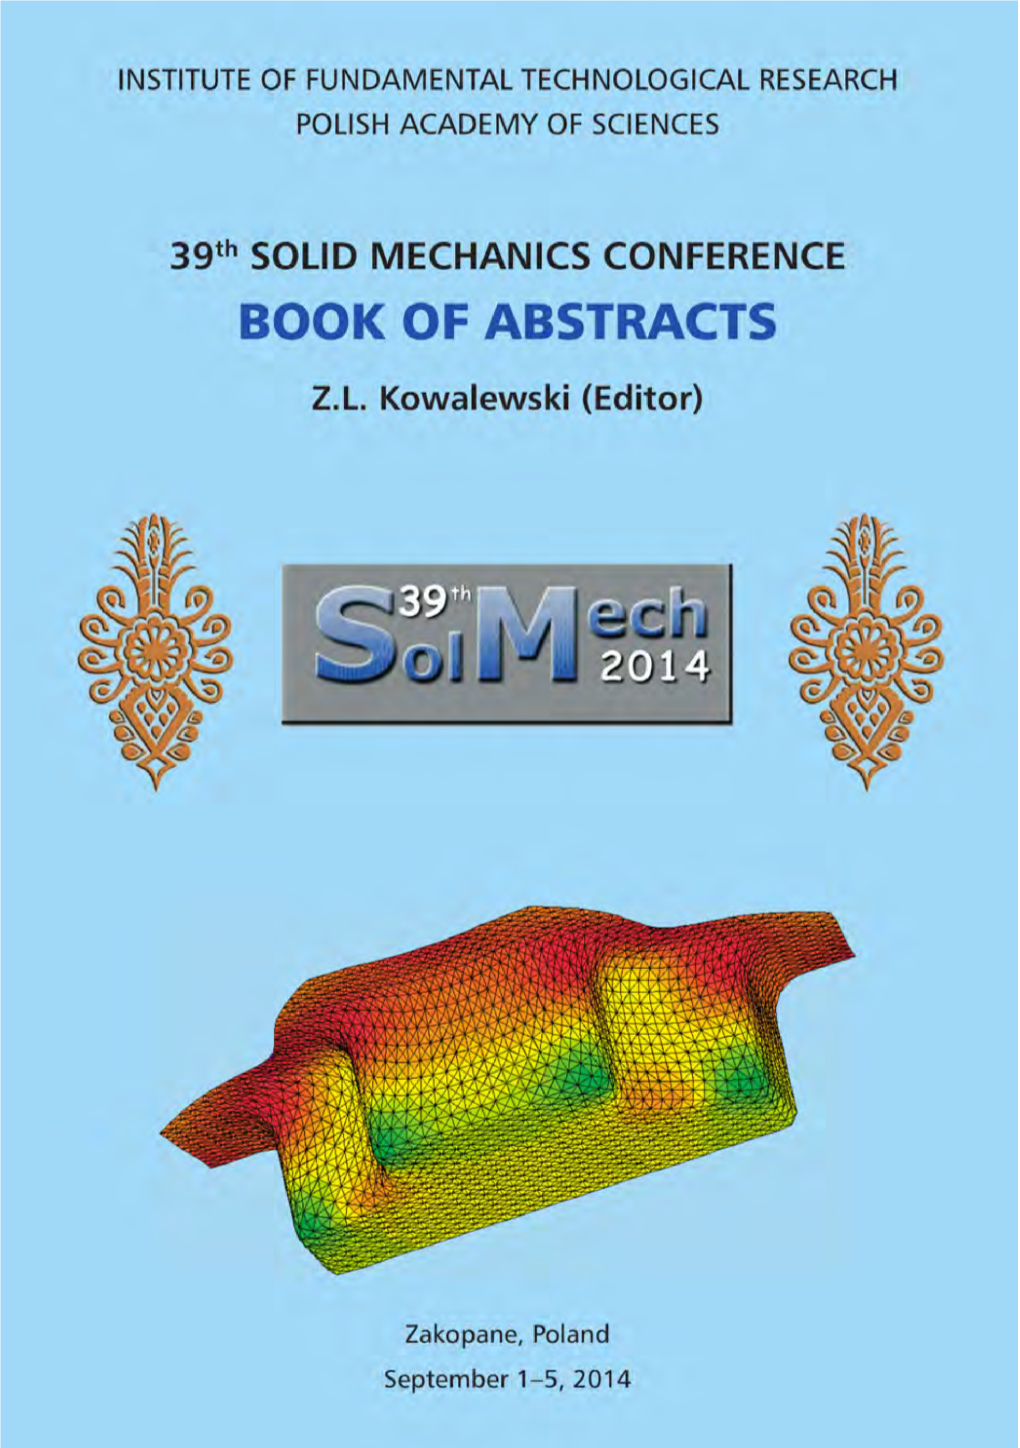 39Th Solid Mechanics Conference Book of Abstracts ACKNOWLEDGMENTS for SUPPORT to INSTITUTEOFFUNDAMENTALTECHNOLOGICALRESEARCH POLISHACADEMYOFSCIENCES